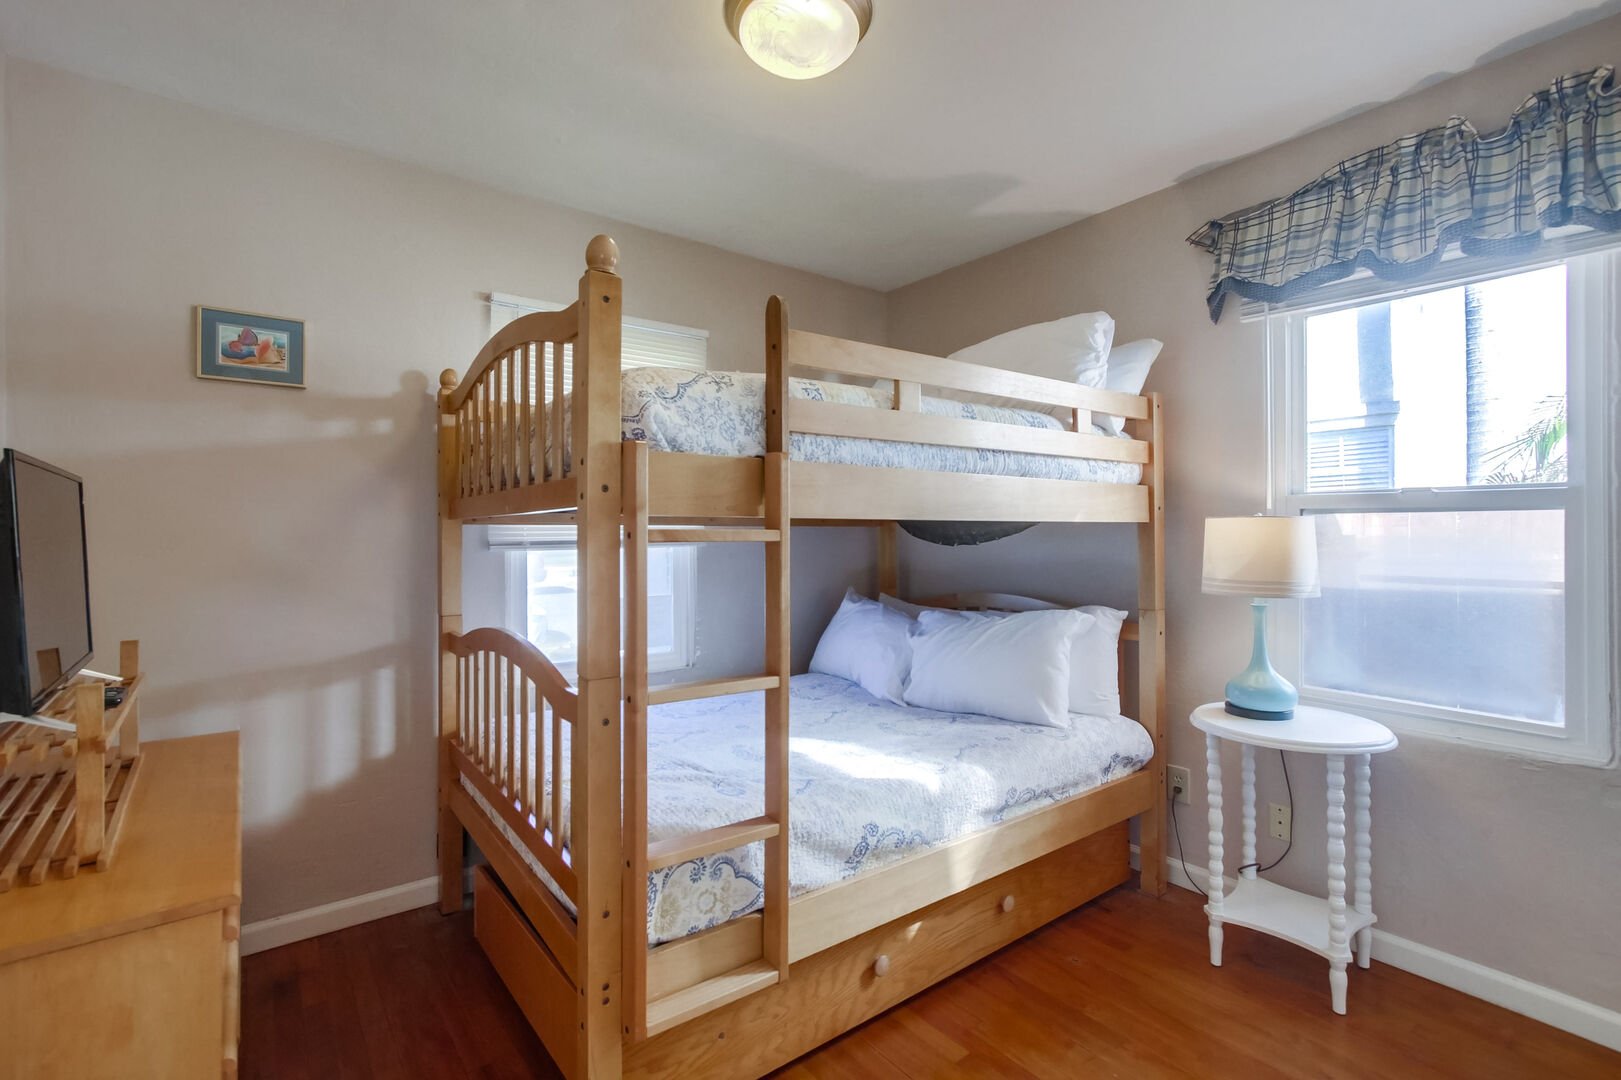 Guest bedroom with double size bunk beds, lamps, overhead lighting, dresser, and lots of natural light